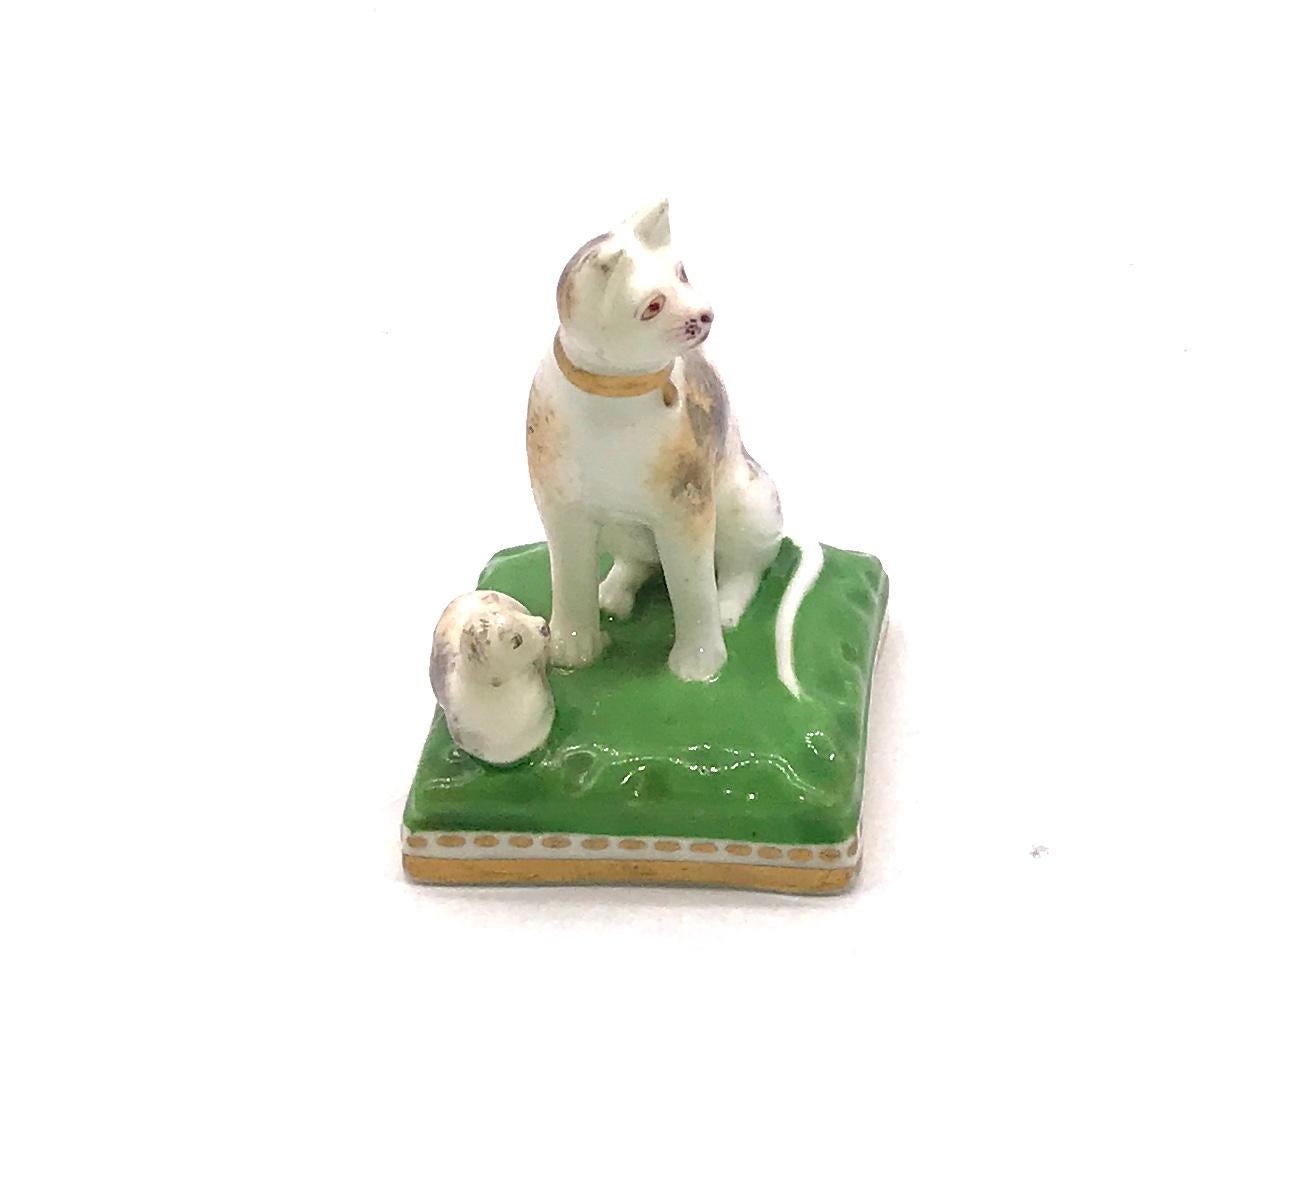 Cats are more rarely seen in porcelain than dogs, this porcelain Chamberlain Worcester cat and her kitten, circa 1810, are seated on a square base., 1.5 inches long and 2 inches high. Robert Chamberlain opened his shop in 1791 and from that point